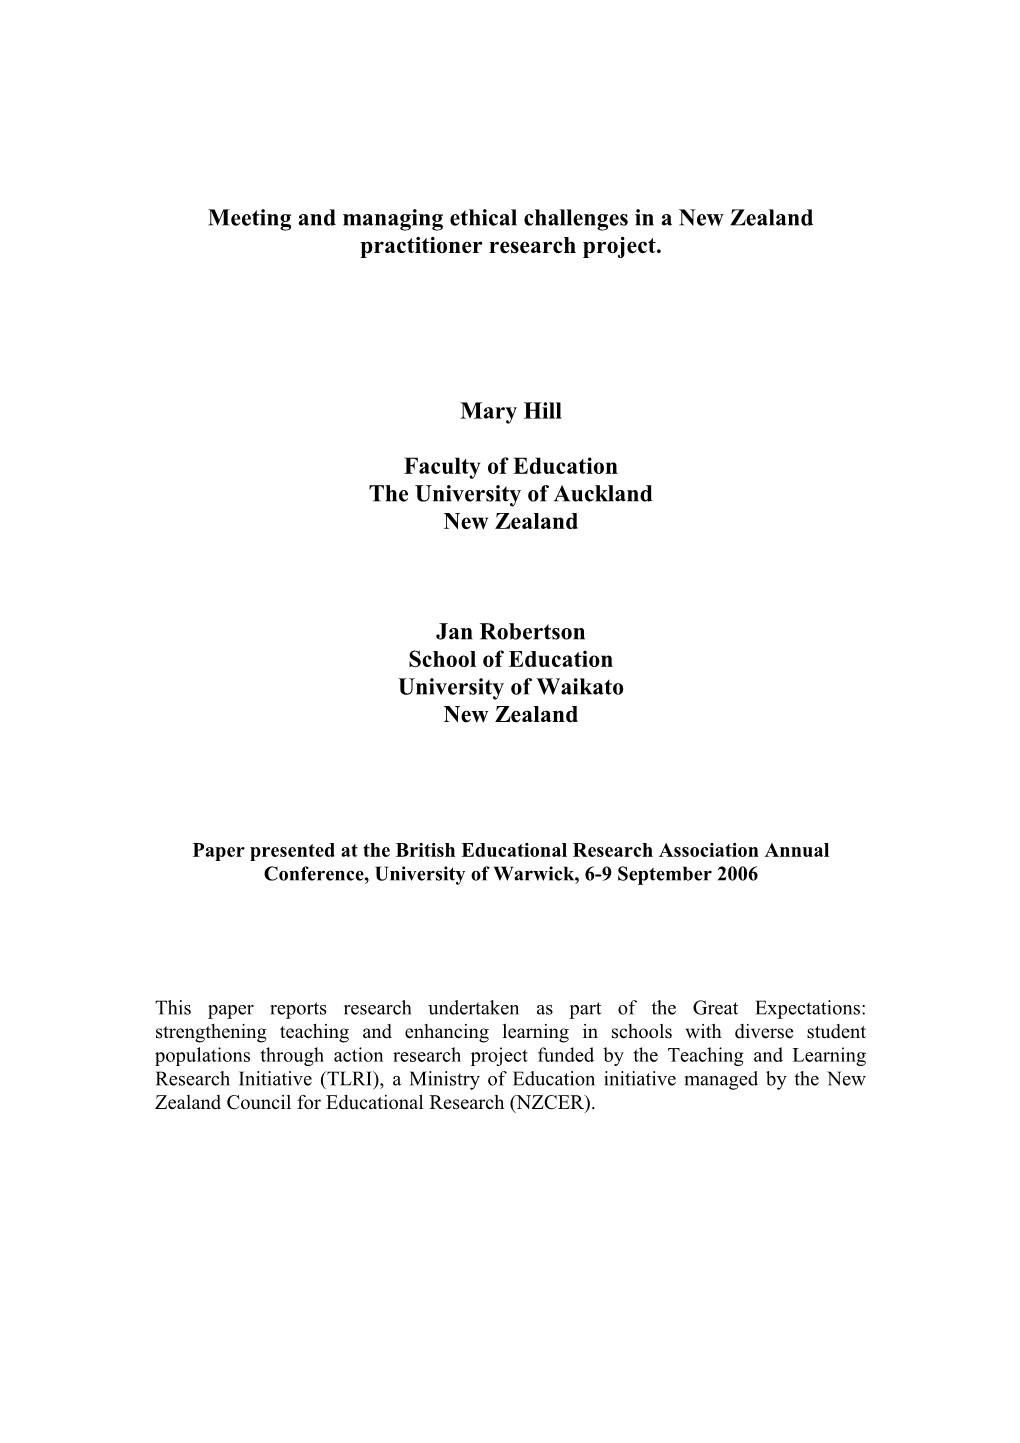 Meeting and Managing Ethical Challenges in a New Zealand Practitioner Research Project